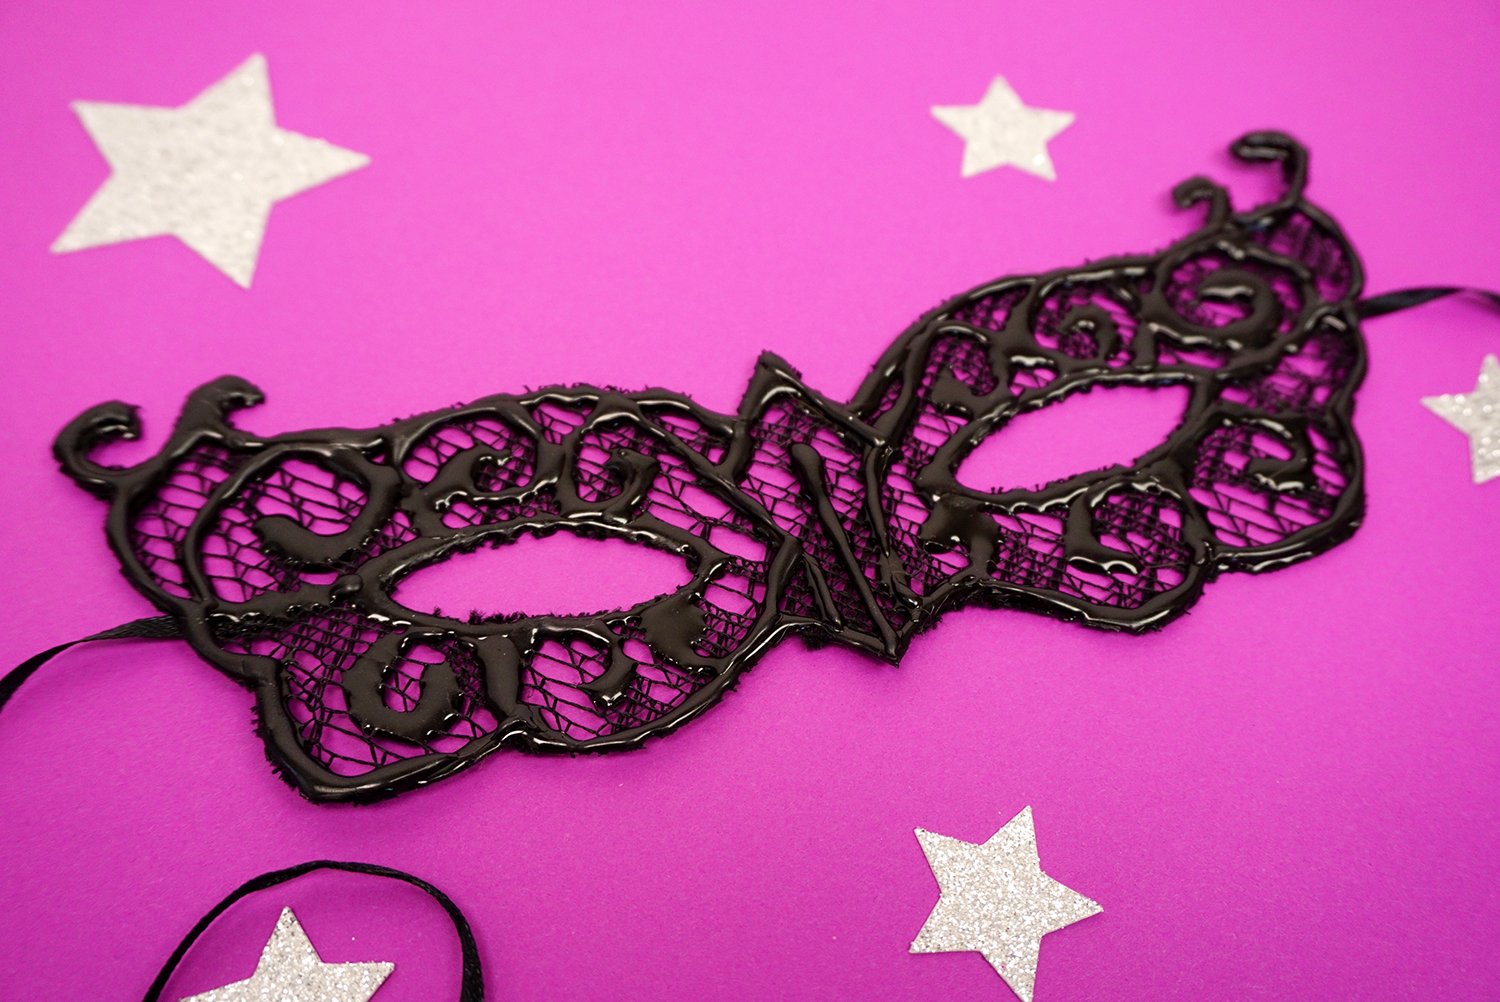 finished masquerade mask fully trimmed